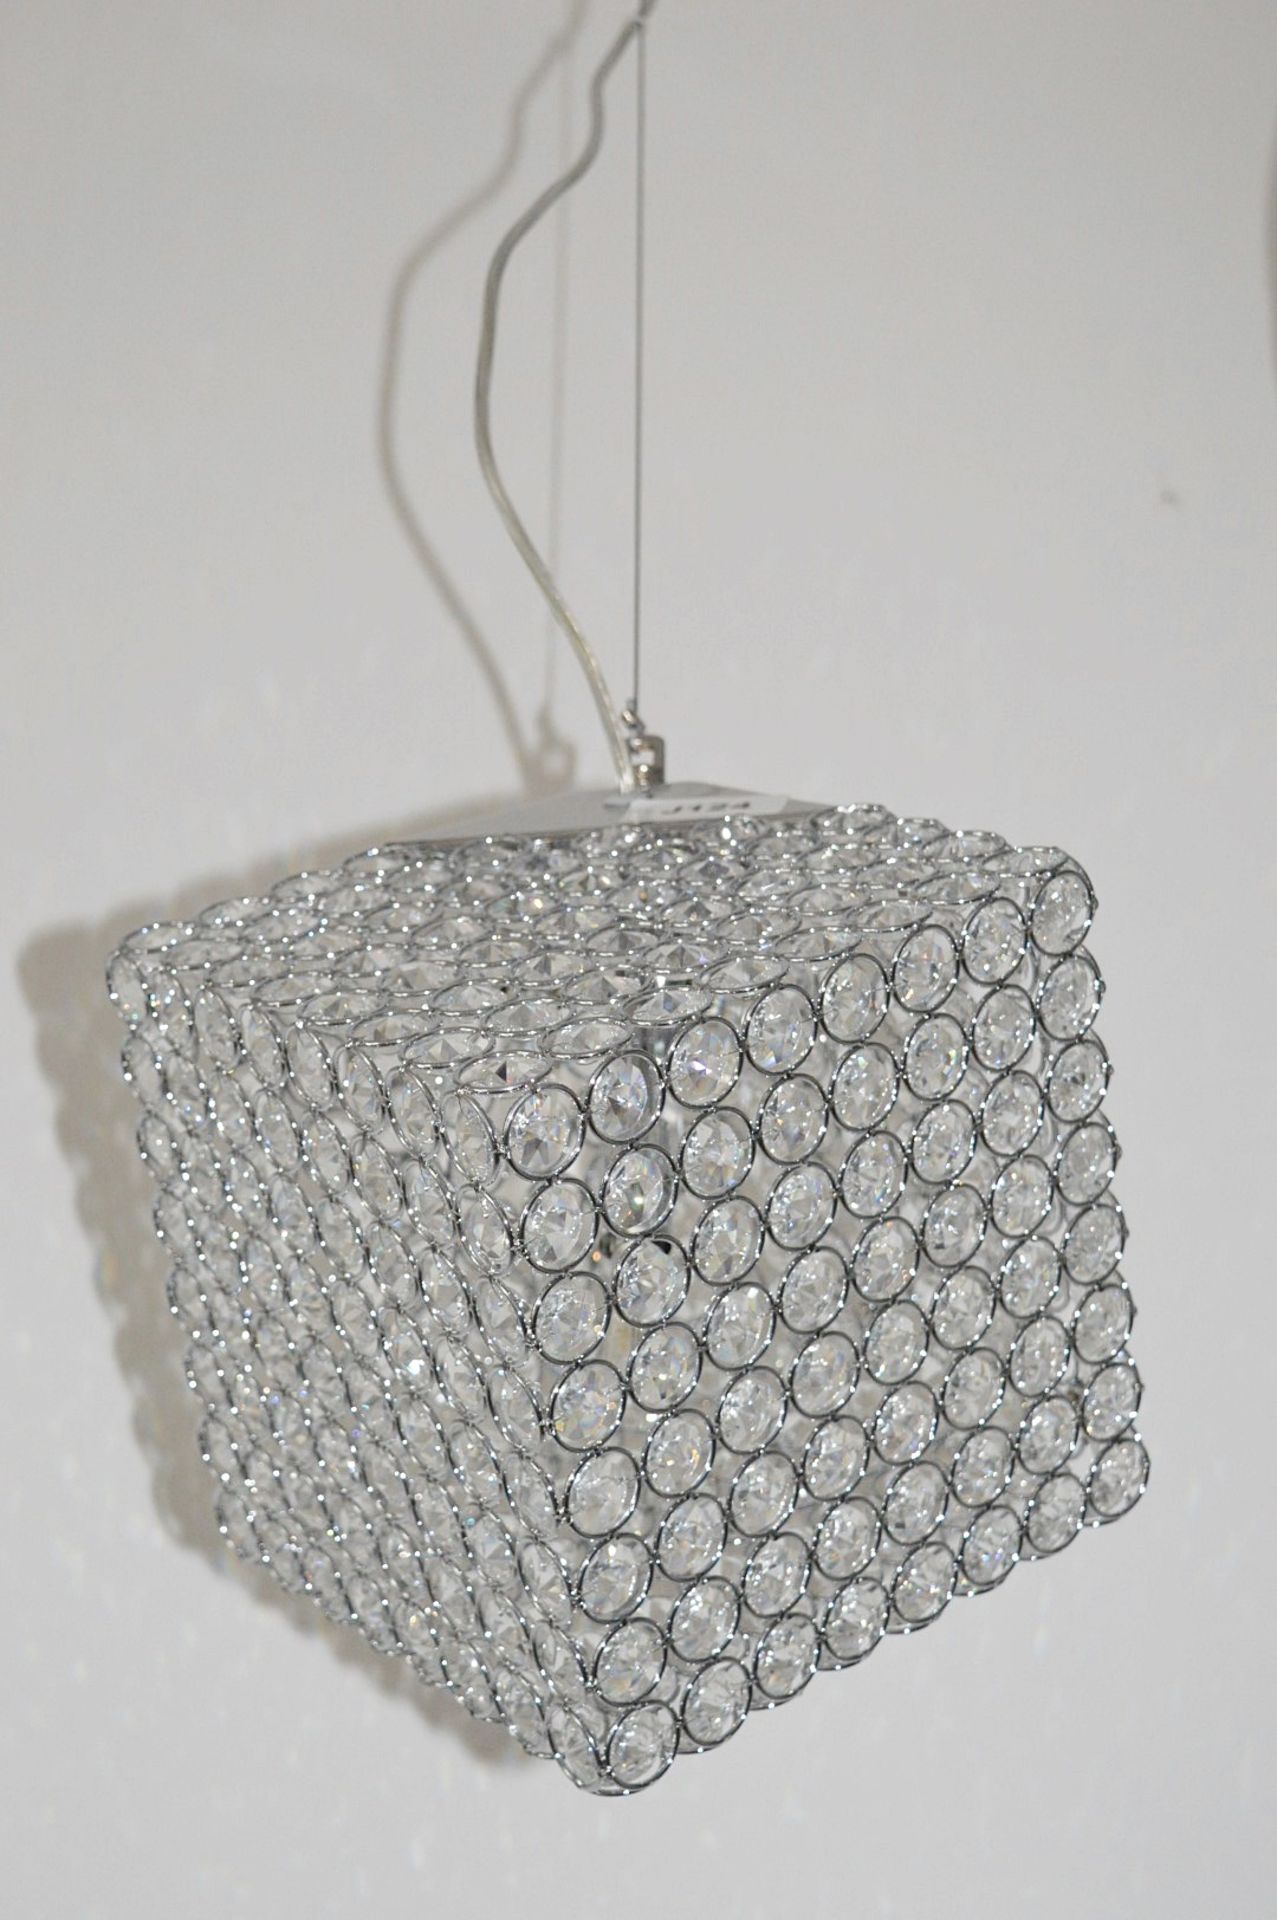 1 x Pendant 4-Light Ceiling Light With Clear Crystal Button Inserts - Chrome Finish - RRP £237.60 - Image 3 of 5